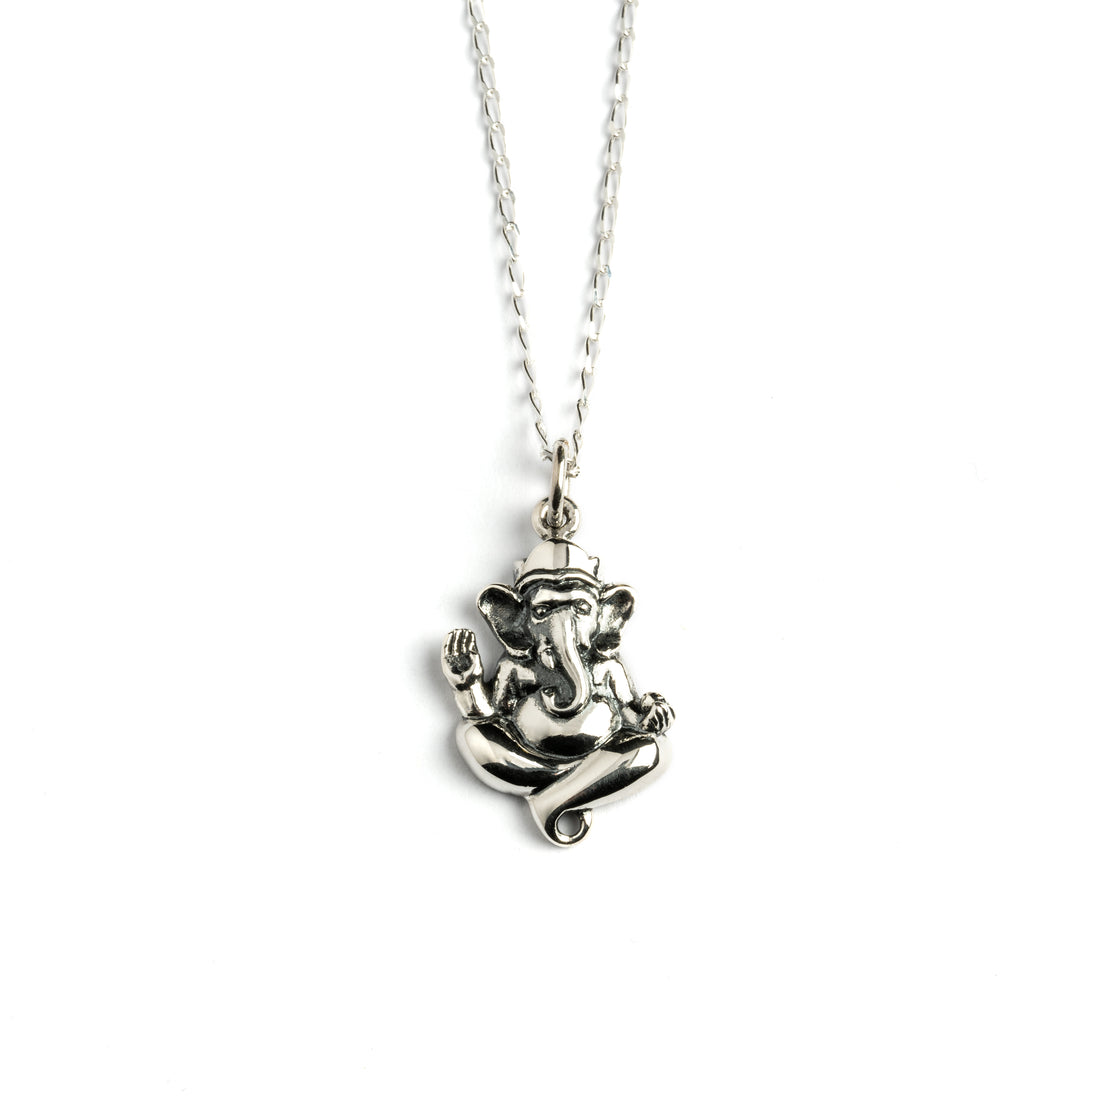 Ganesh Silver charm necklace frontal view